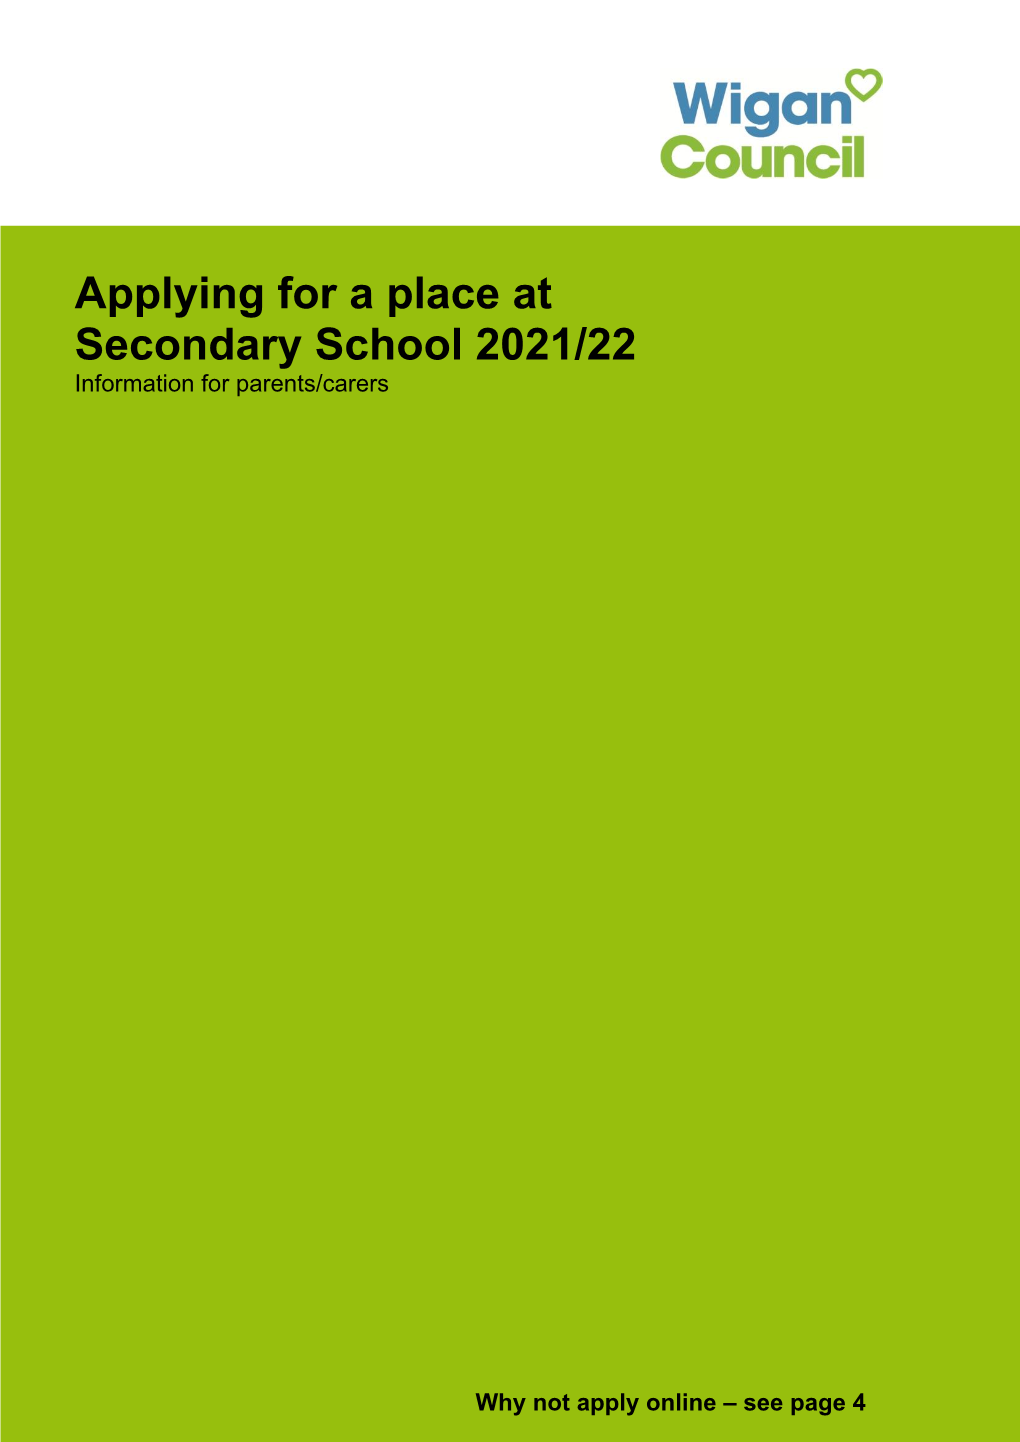 Applying for a Place at Secondary School Booklet 2021-22